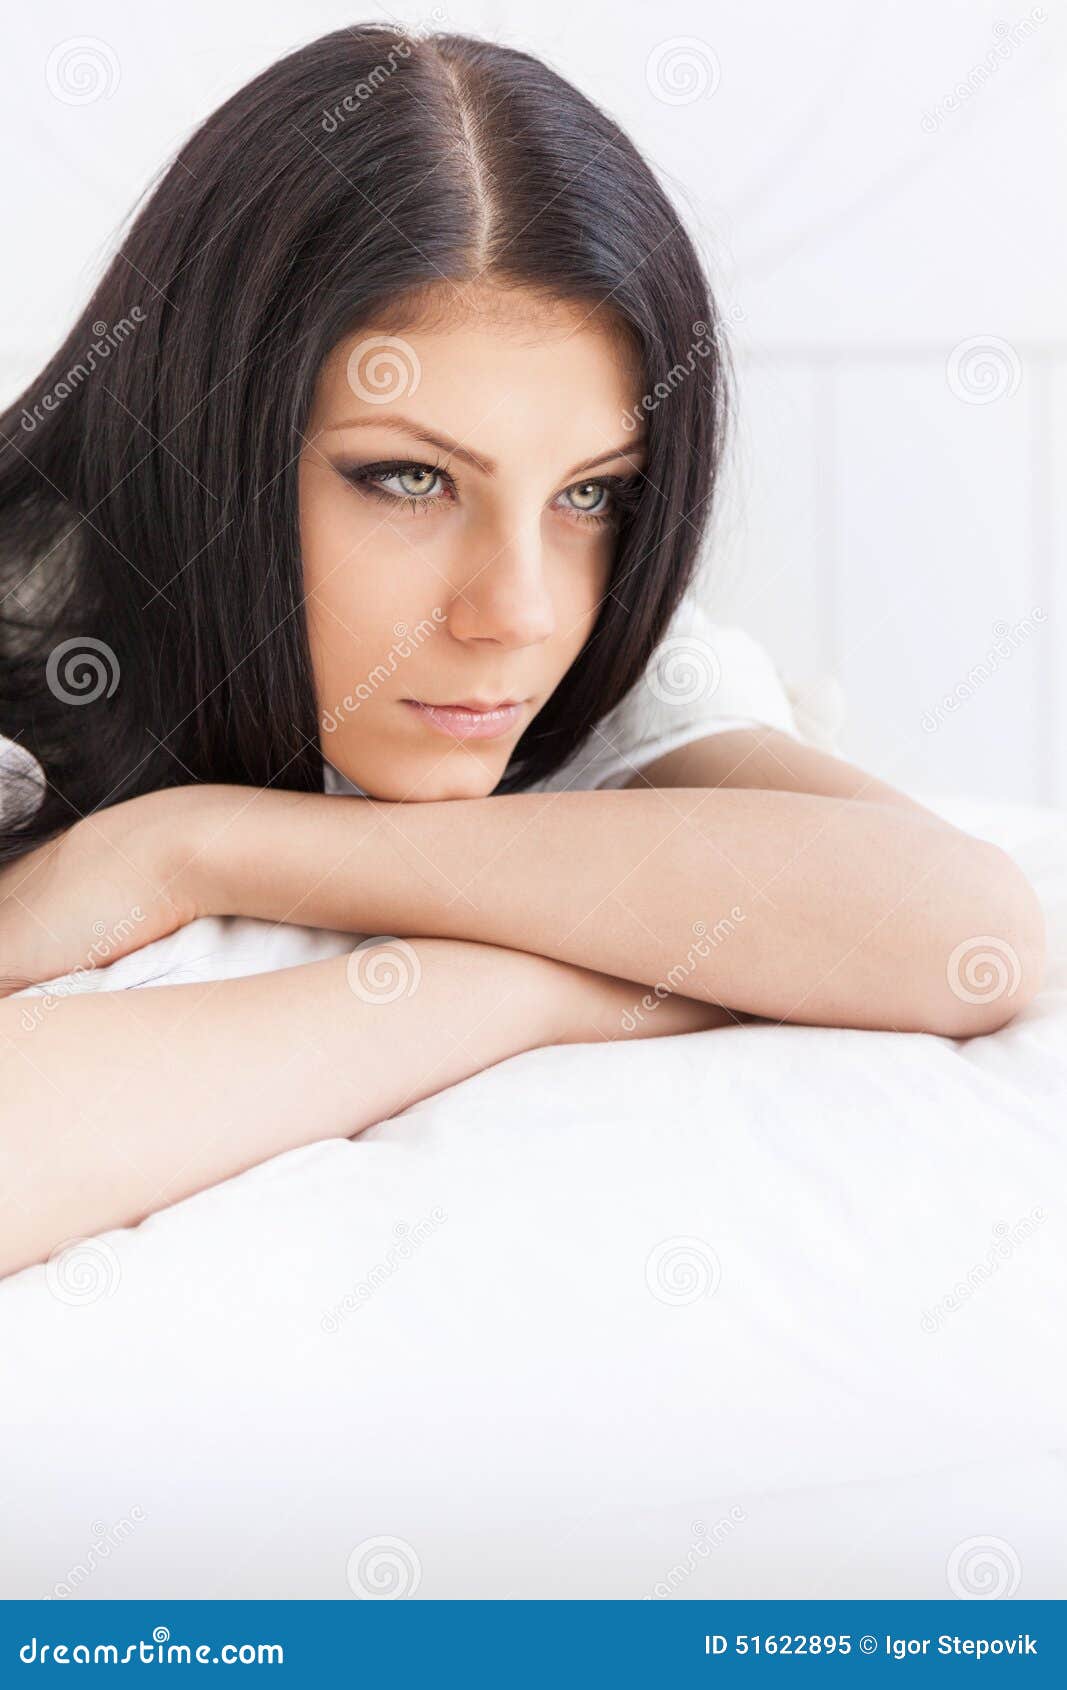 sad teenage girl thoughtfully reflects lying on the bed